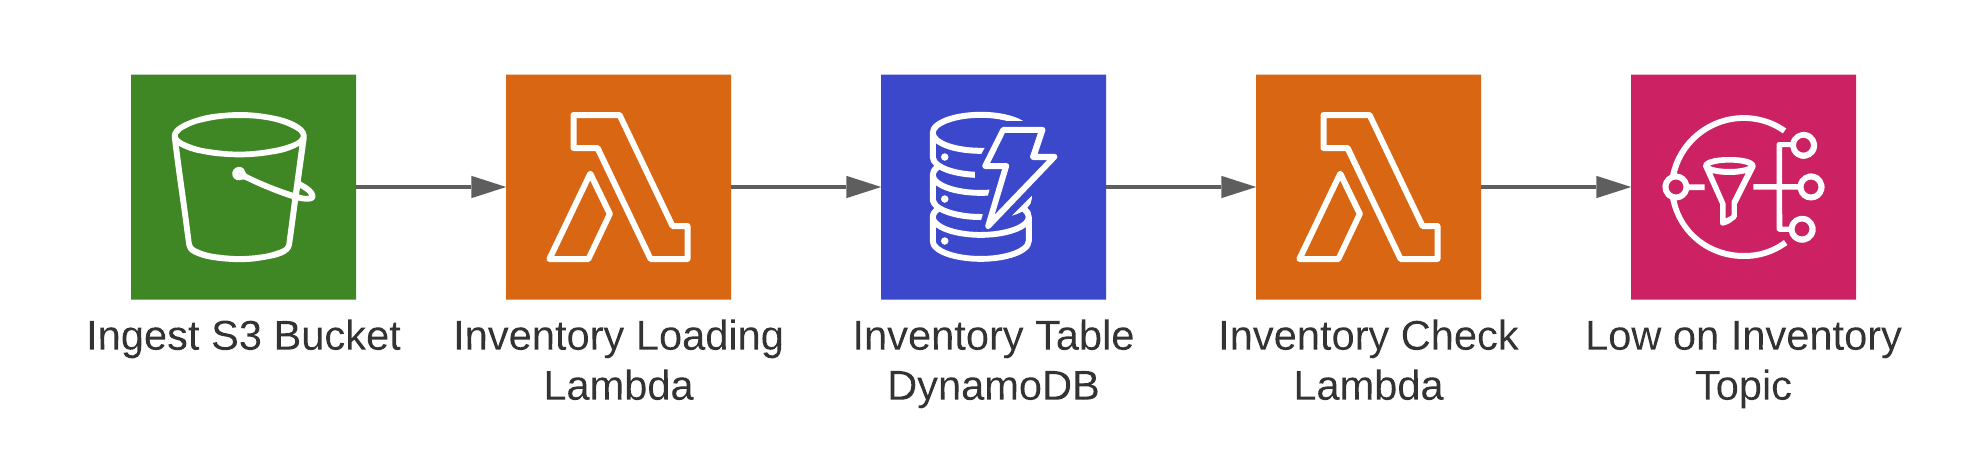 Inventory Exercise Architecture